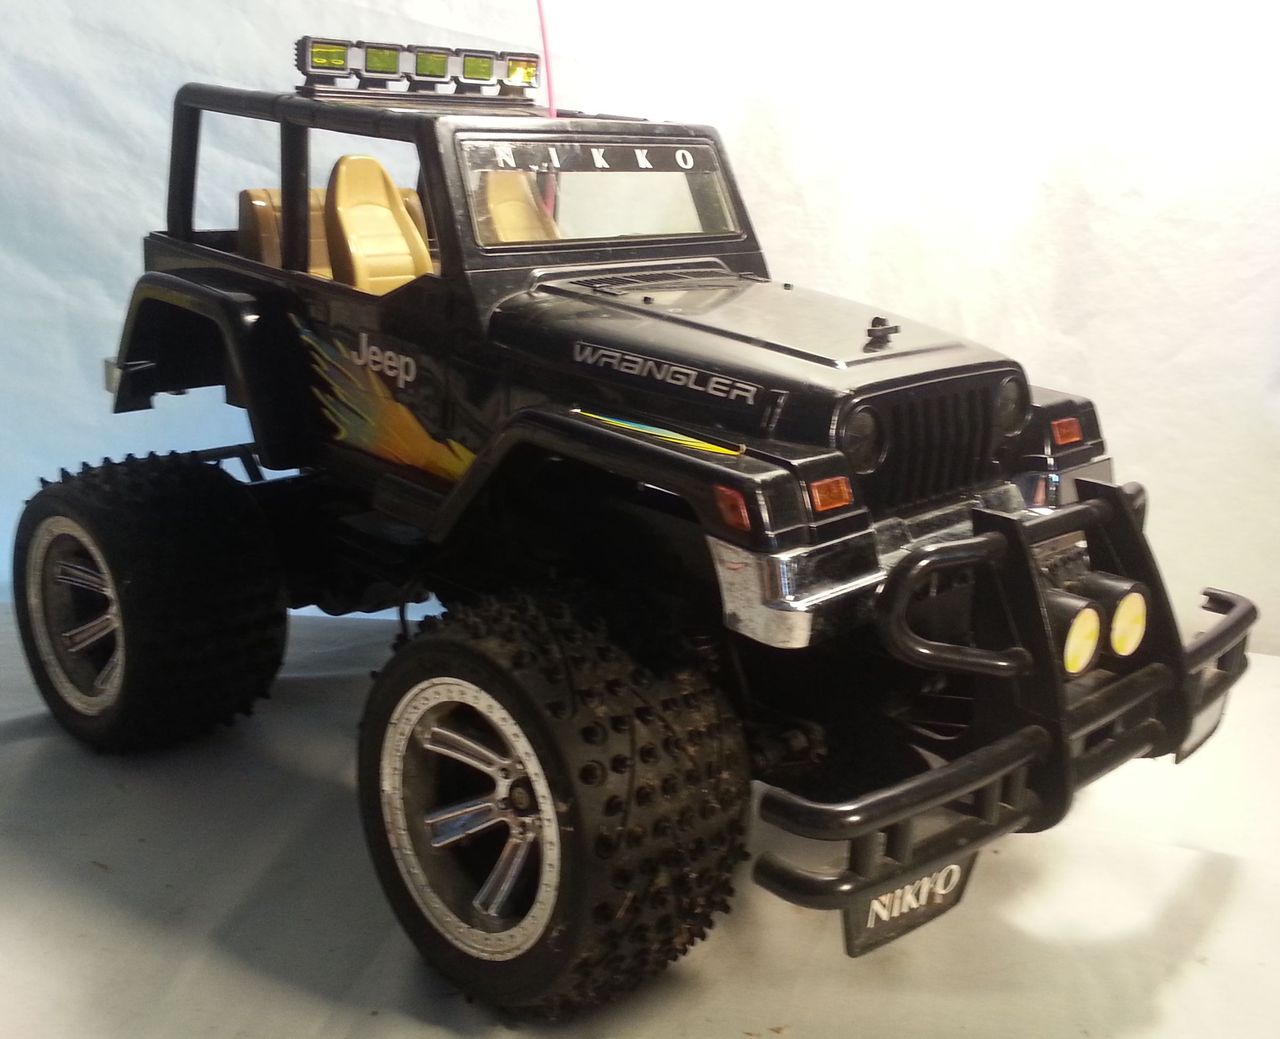 Nikko R/C Remote Controlled 1-18 Scale Off-Road Truck Jeep Wrangler Kids Toy